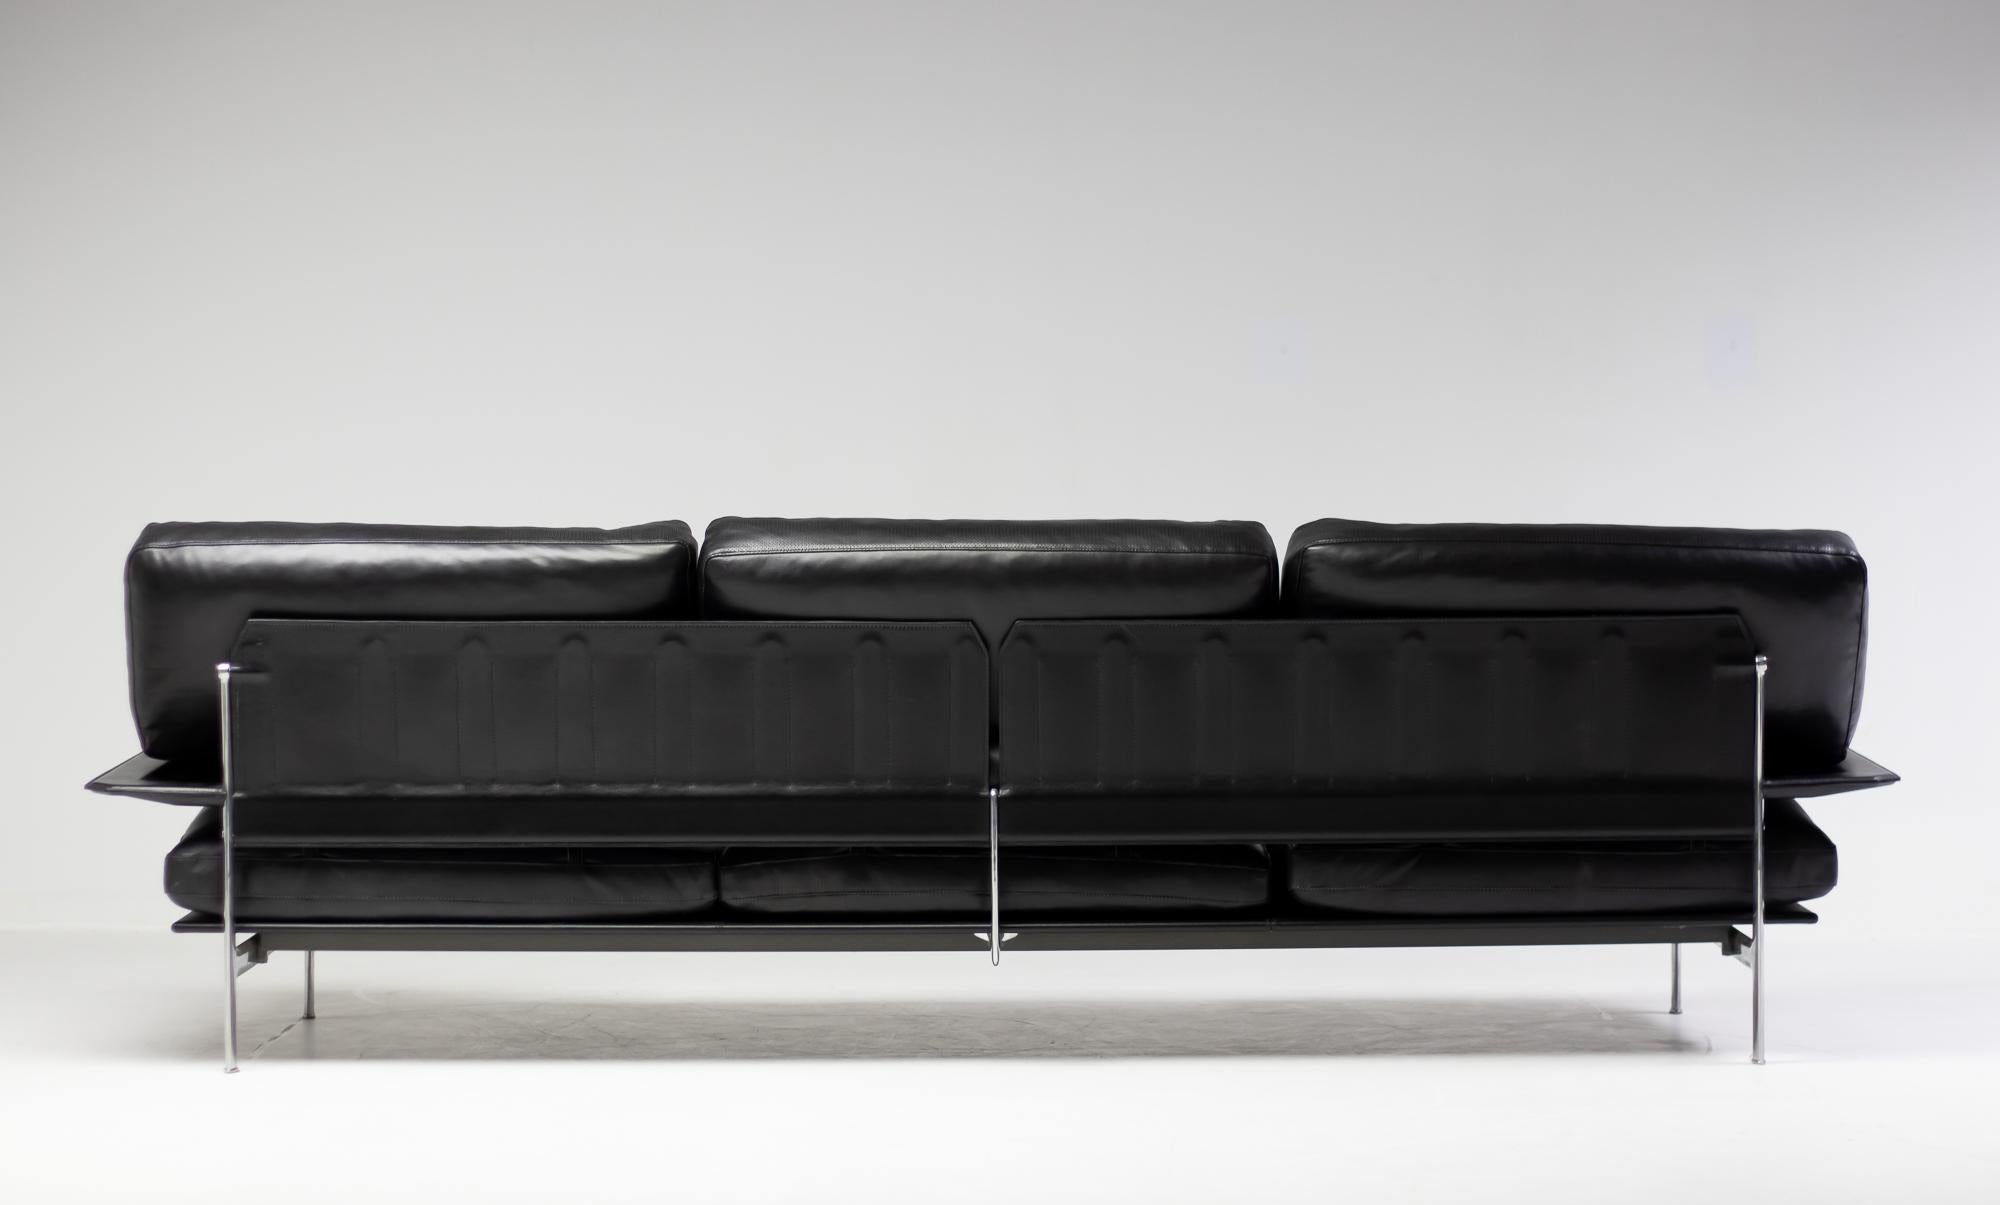 Diesis sofa, designed by Antonio Citterio and Paolo Nava for B&B Italia, Italy in 1979.
The epitome of innovative research and sophisticated handcrafting skills, it has become a landmark in the history of design.
This is the desirable wide